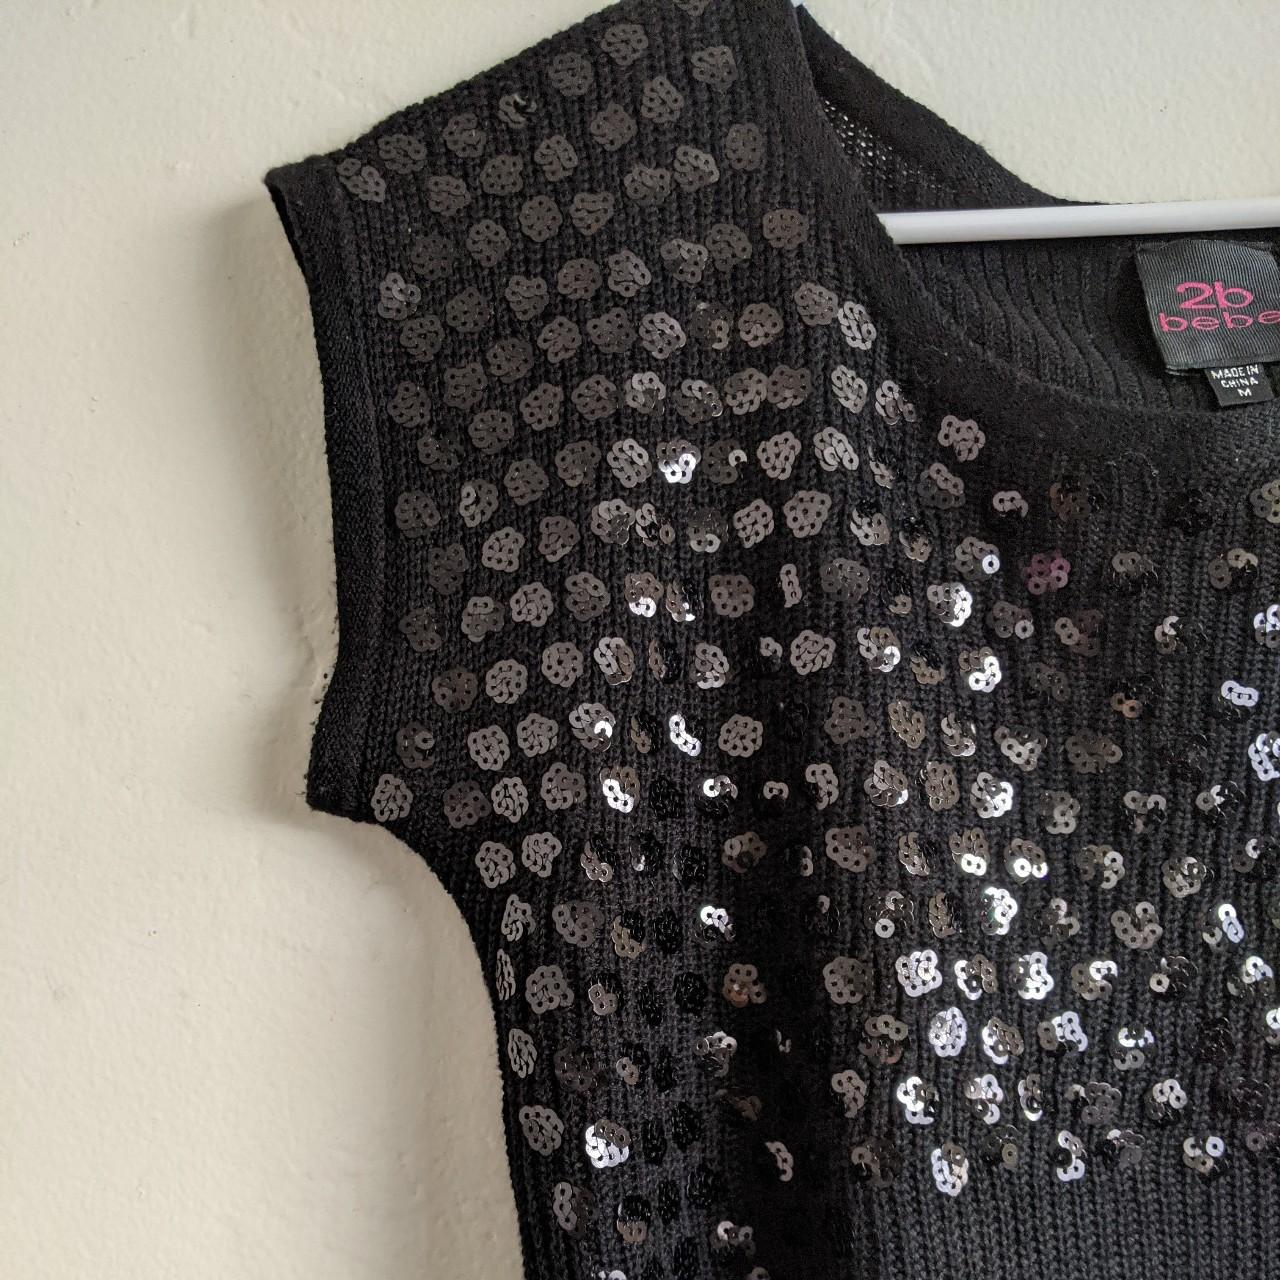 Product Image 3 - black sequin top 

size m
yarn